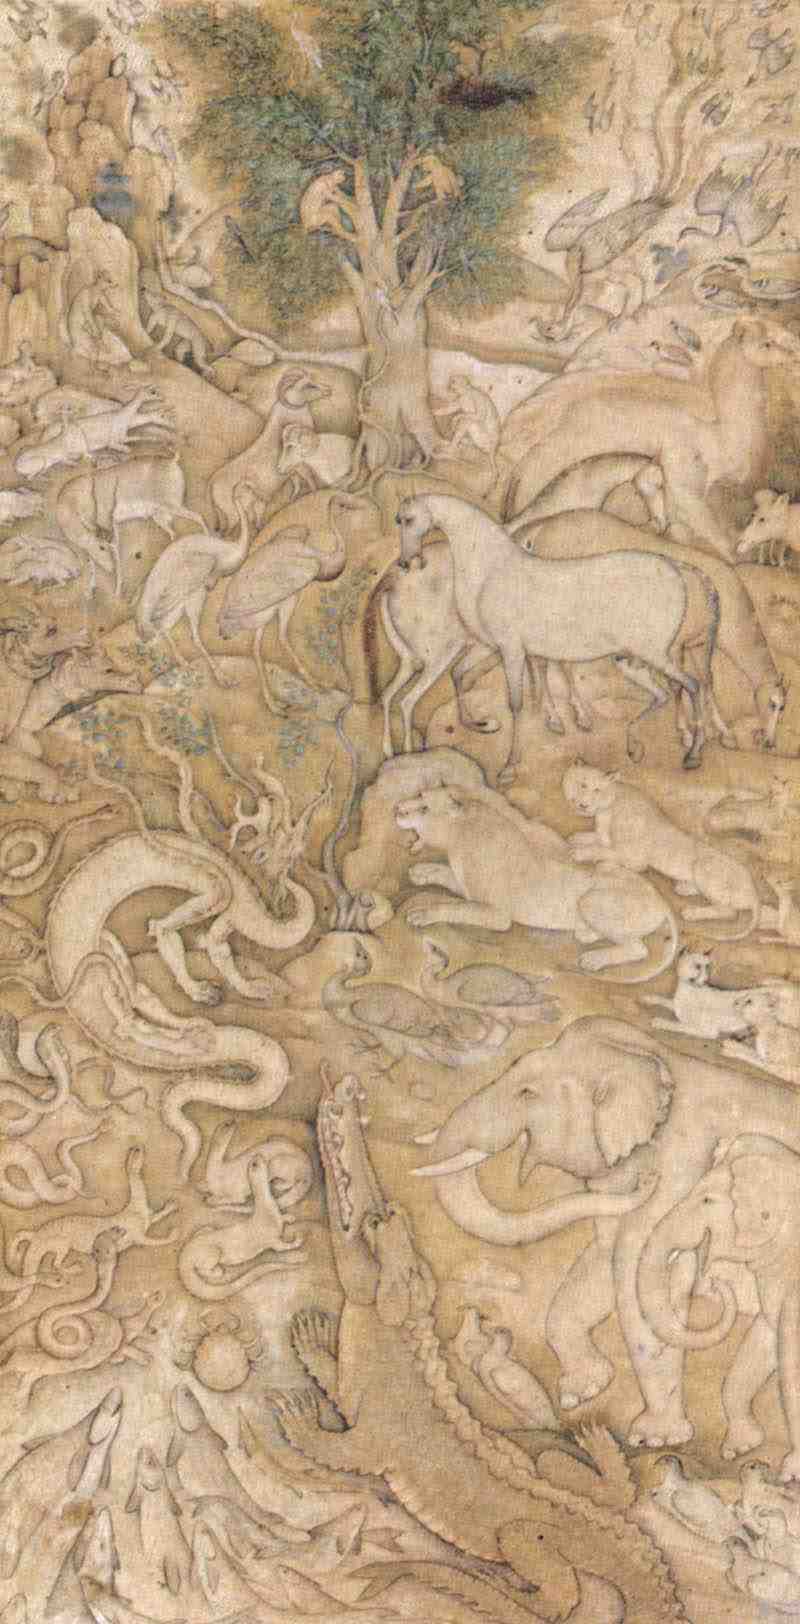 Animal World. Master of the Mughal school of the first quarter of the 17th century